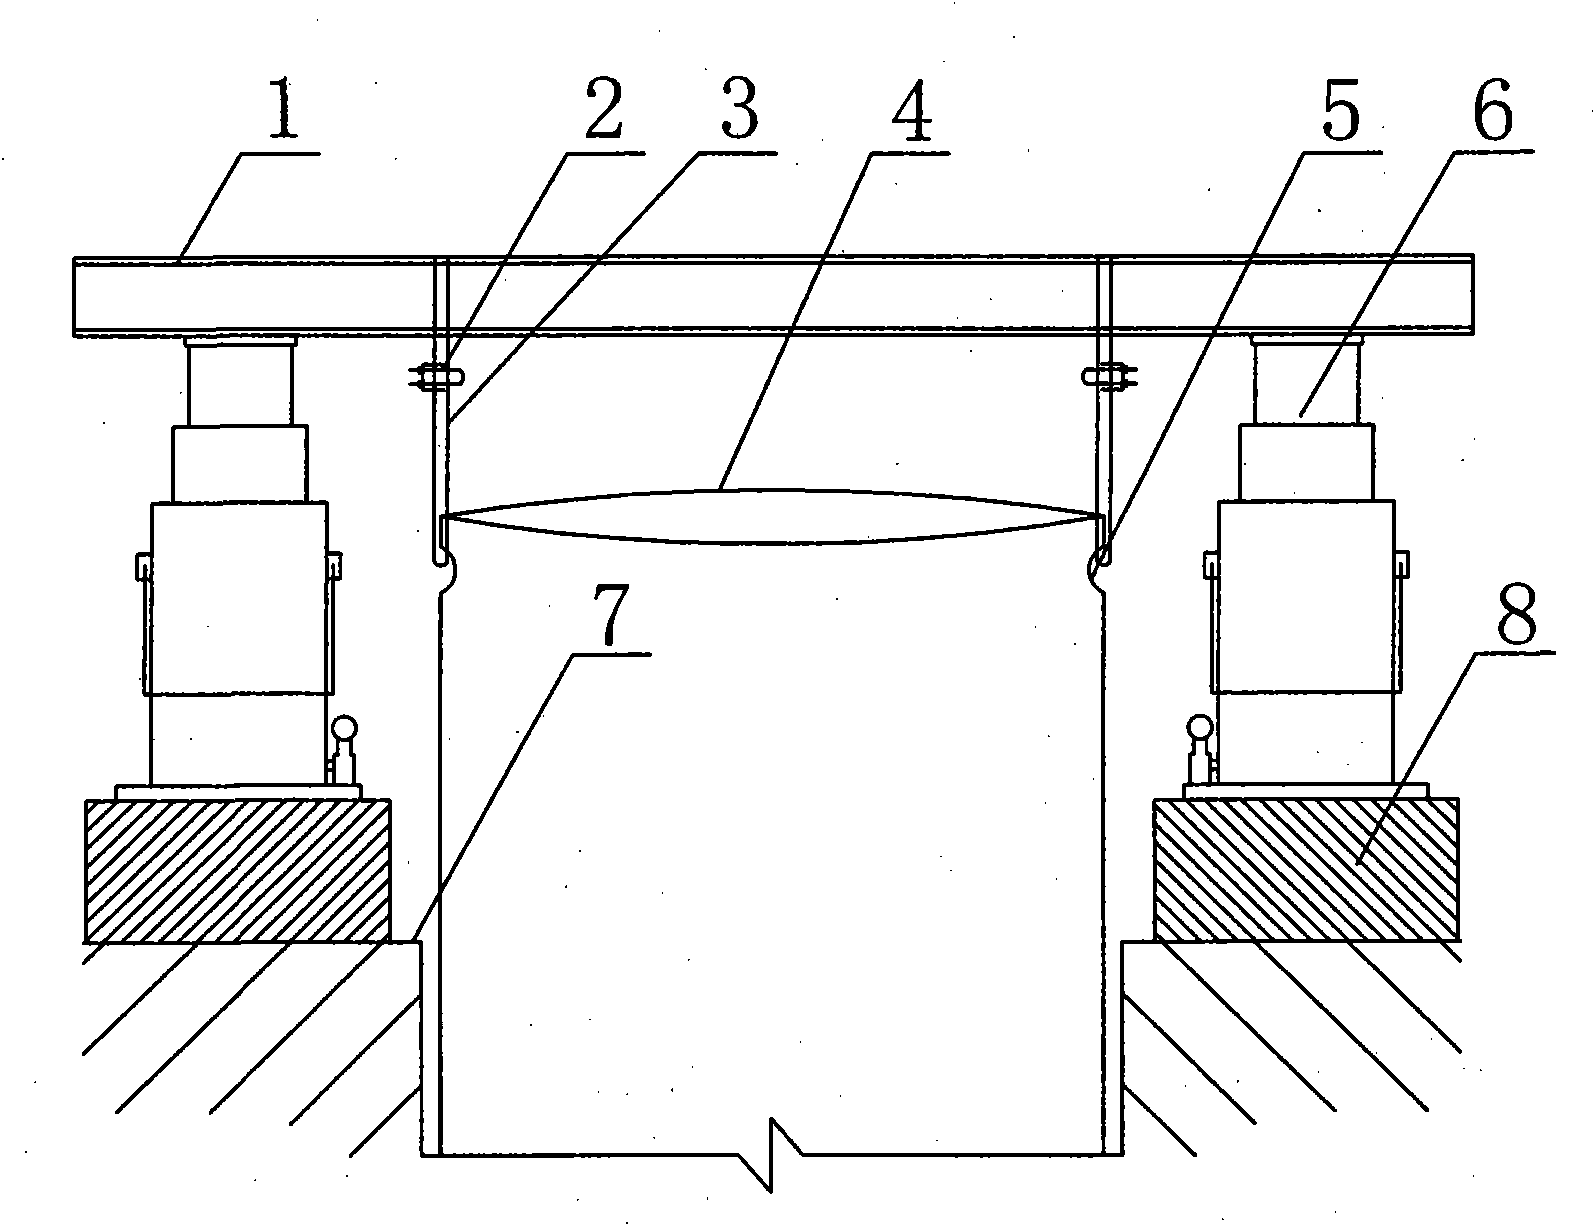 Method for jacking steel casting of bored pile by using jacks